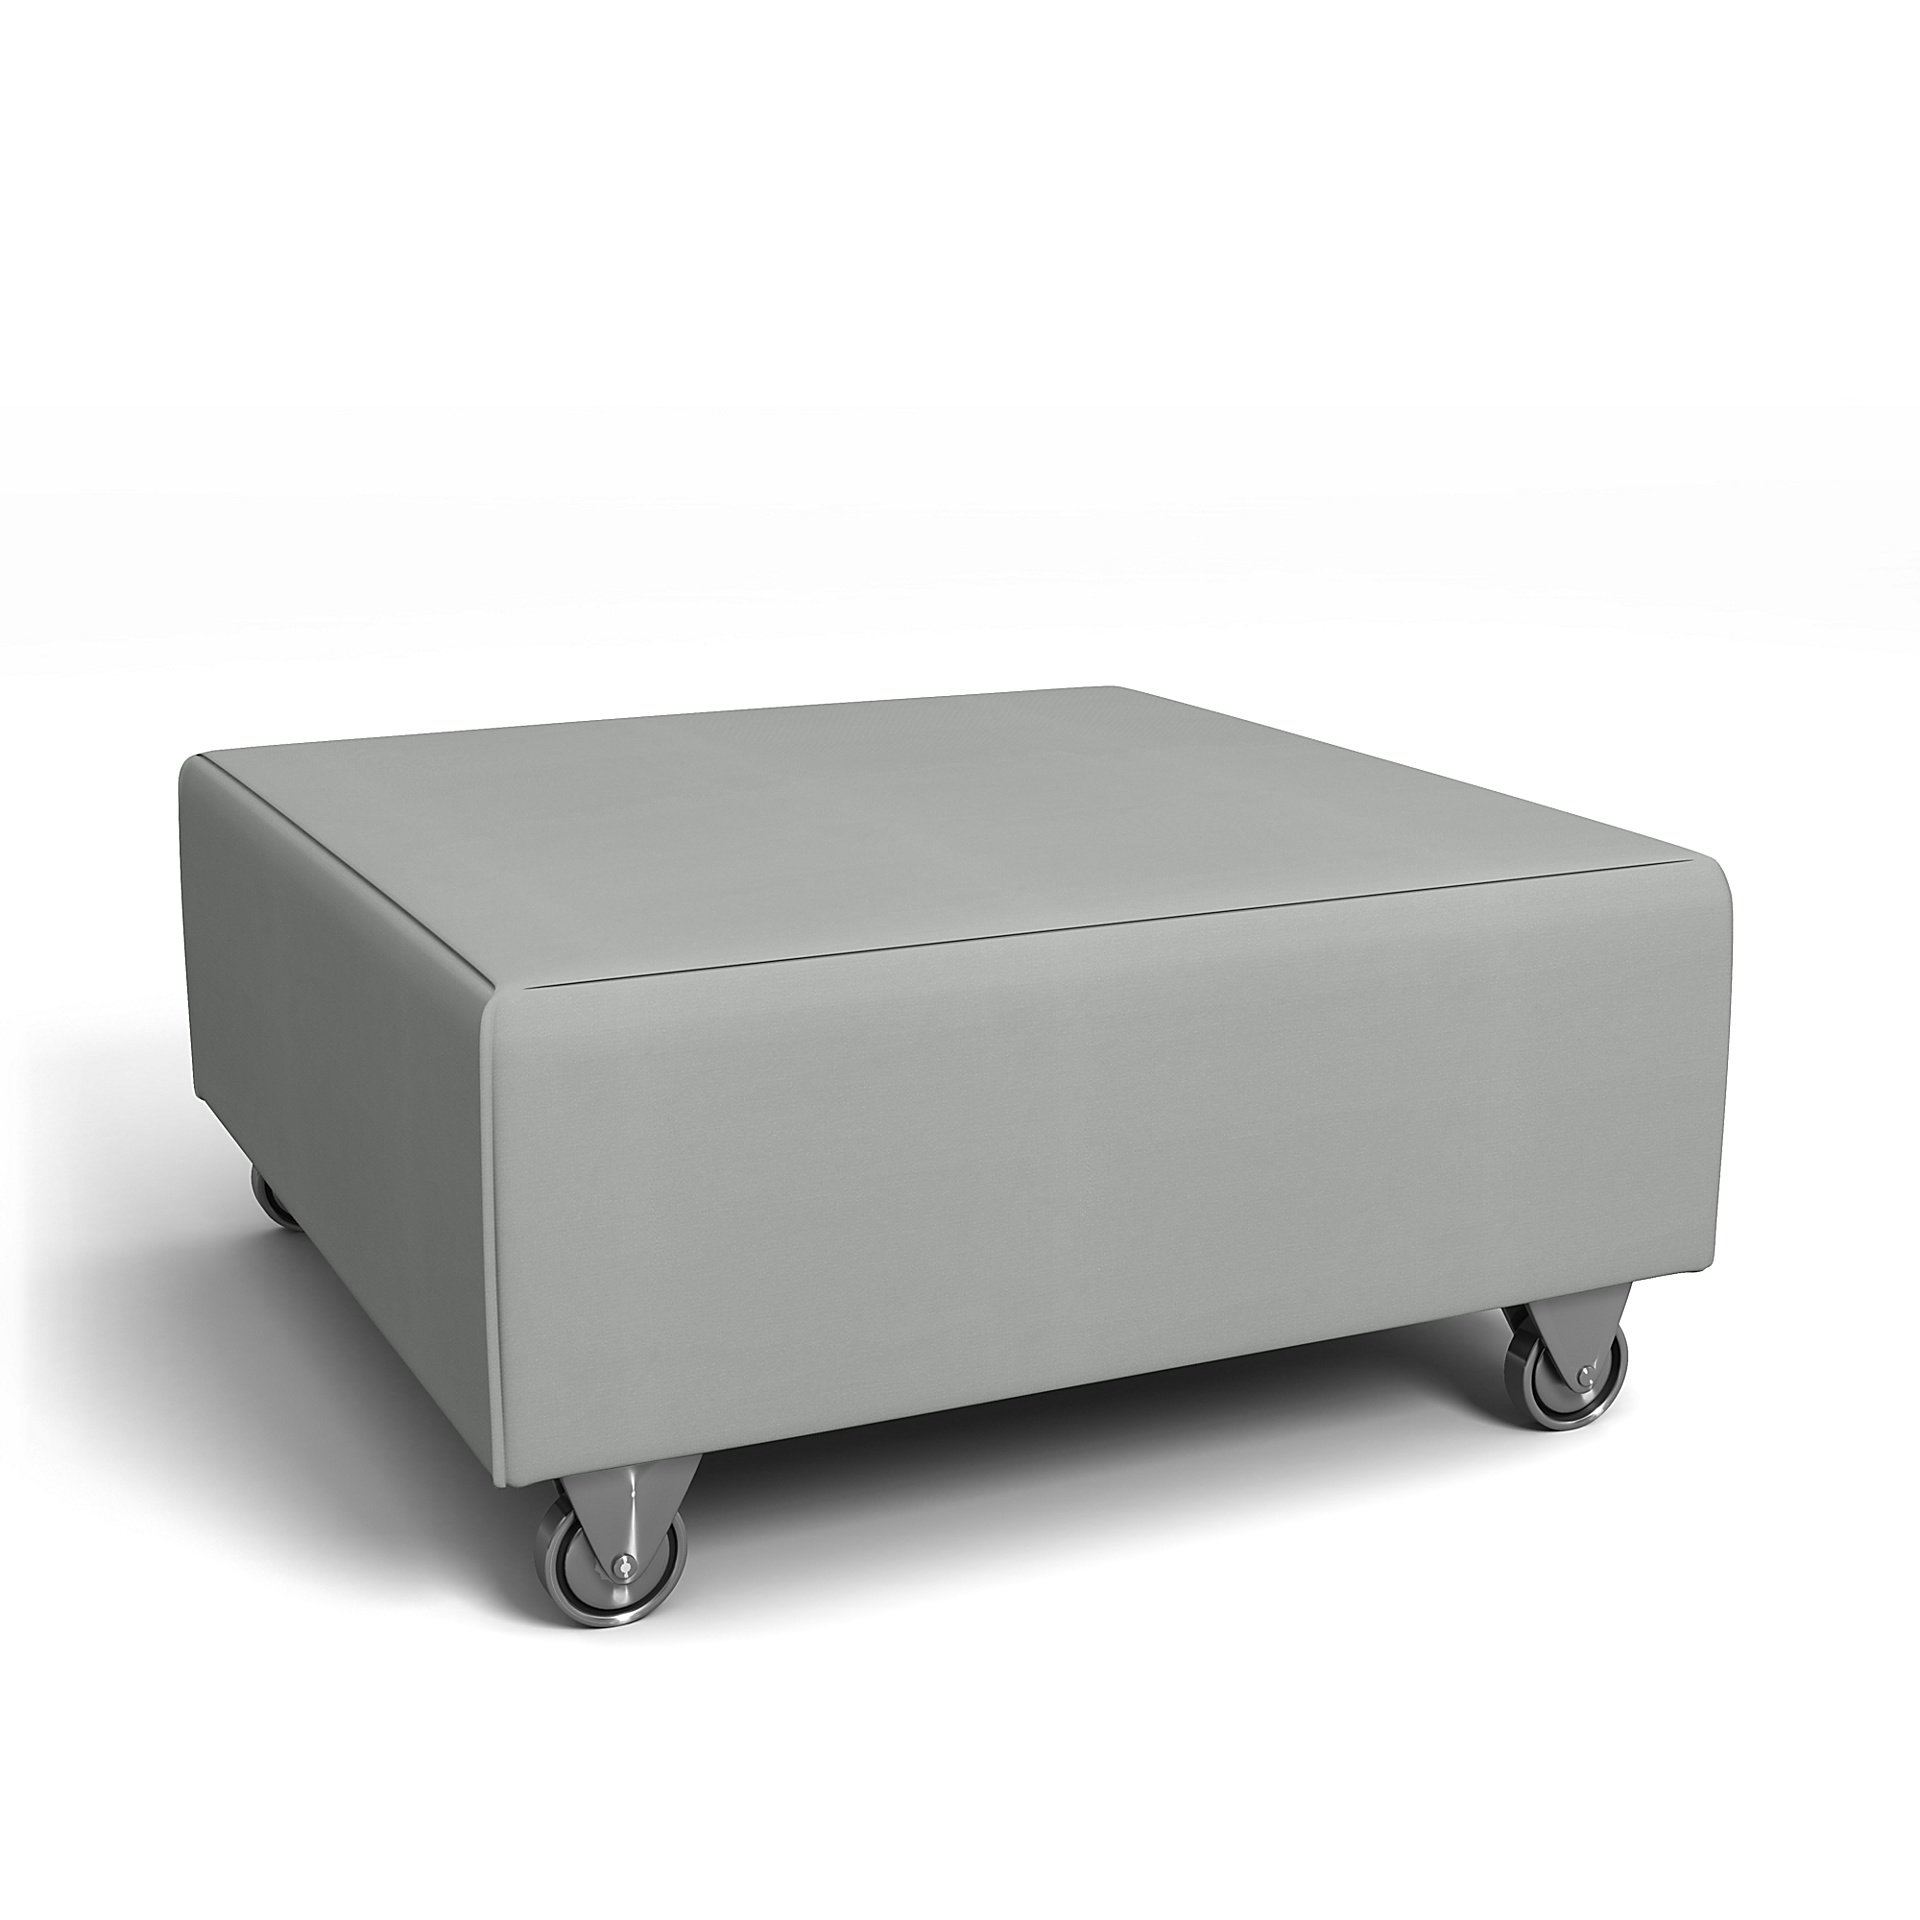 IKEA - Falsterbo Footstool Cover, Silver Grey, Cotton - Bemz